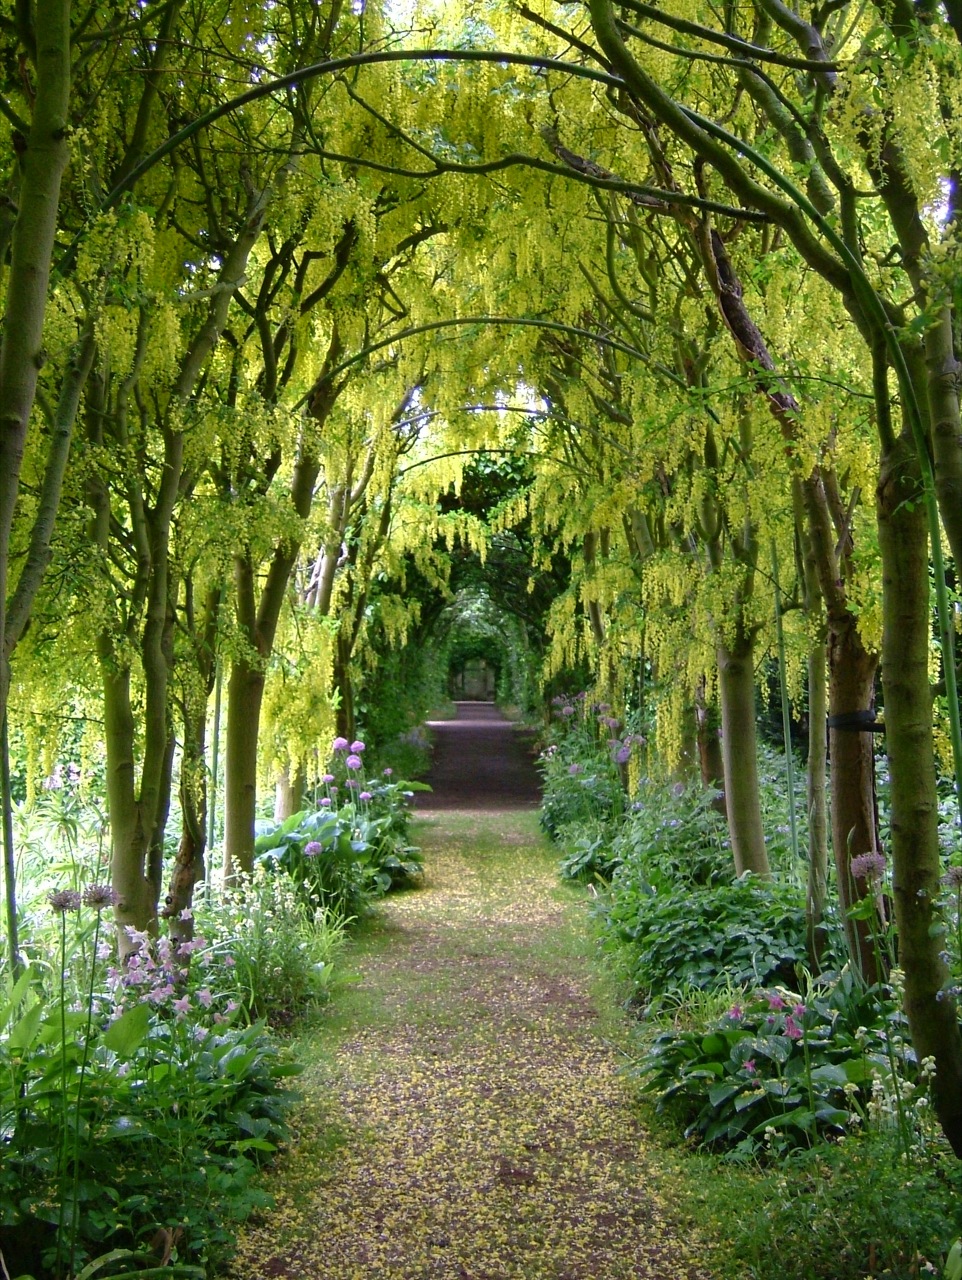 an pathway made through some trees with flowers